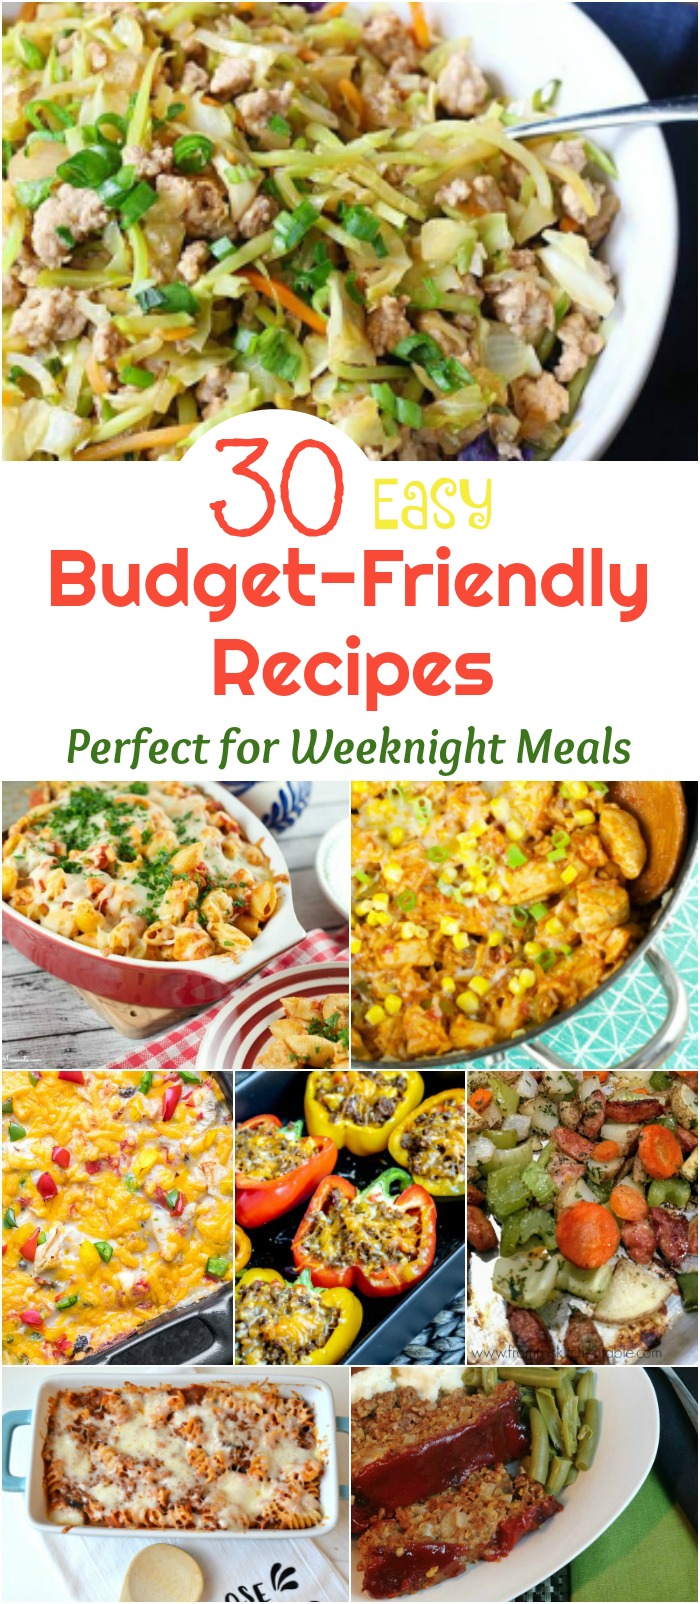 30 Easy Budget-Friendly Recipes Perfect for Weeknight Meals